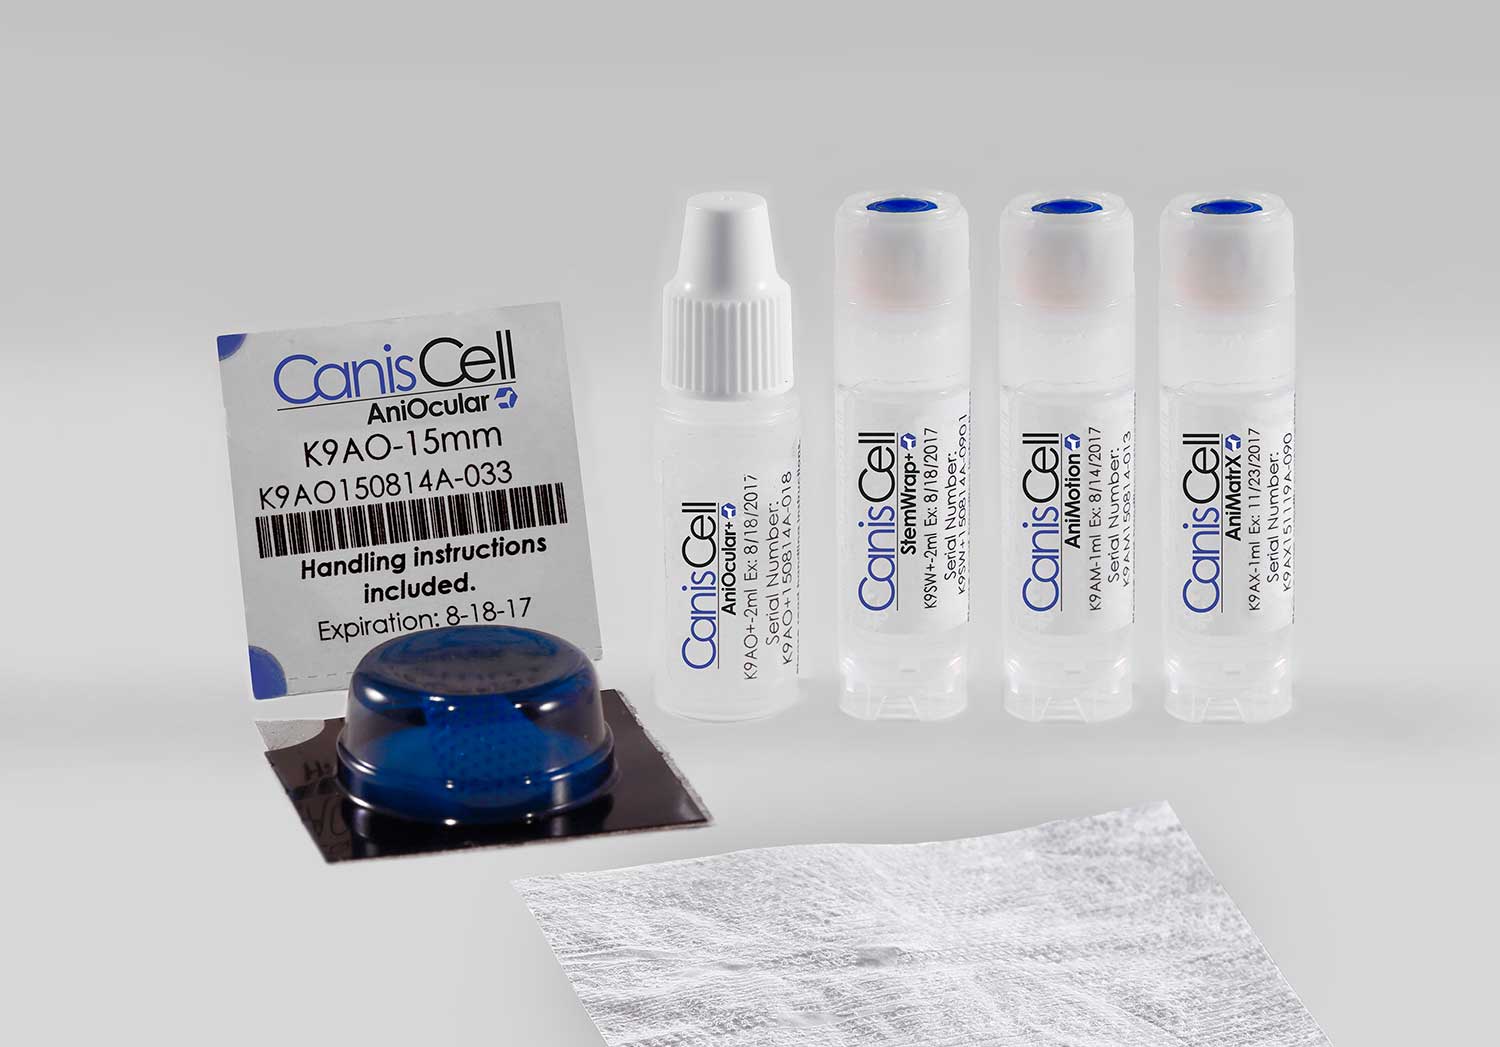 AniCell CanisCell Products